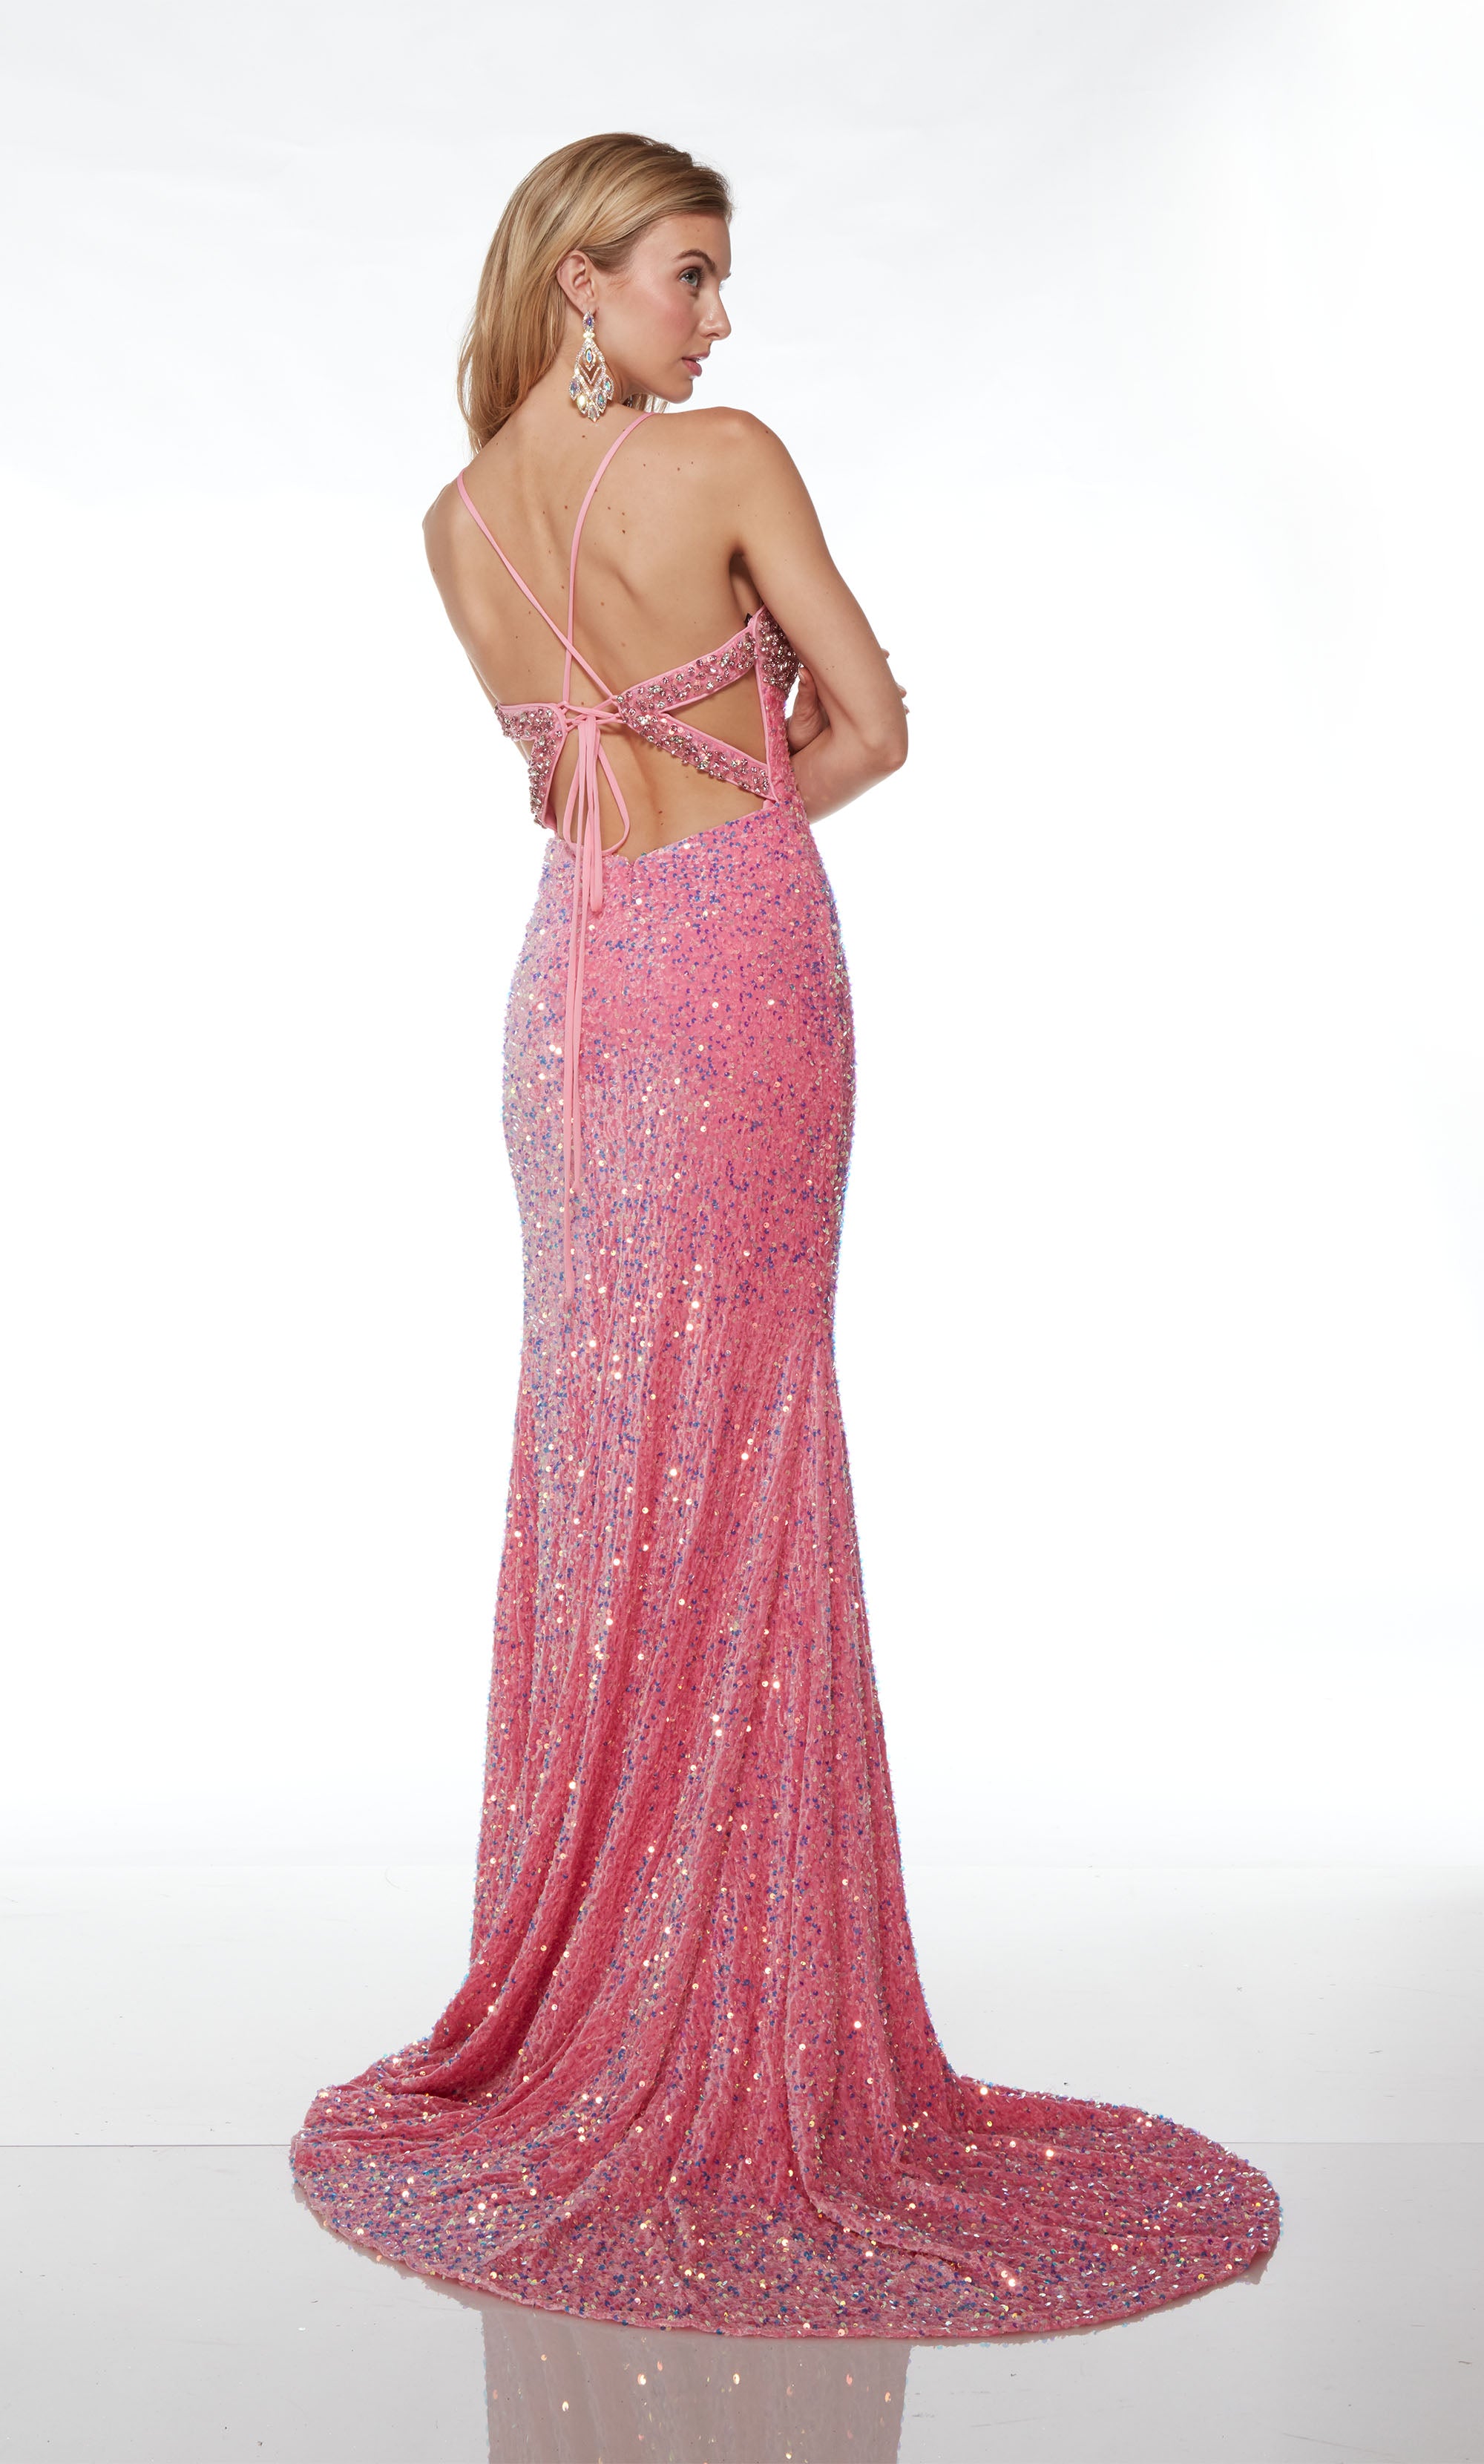 Fitted iridescent pink sequin dress with sweetheart neckline, rhinestone embellished bust, high slit, crisscross lace-up back, and an stunning train.